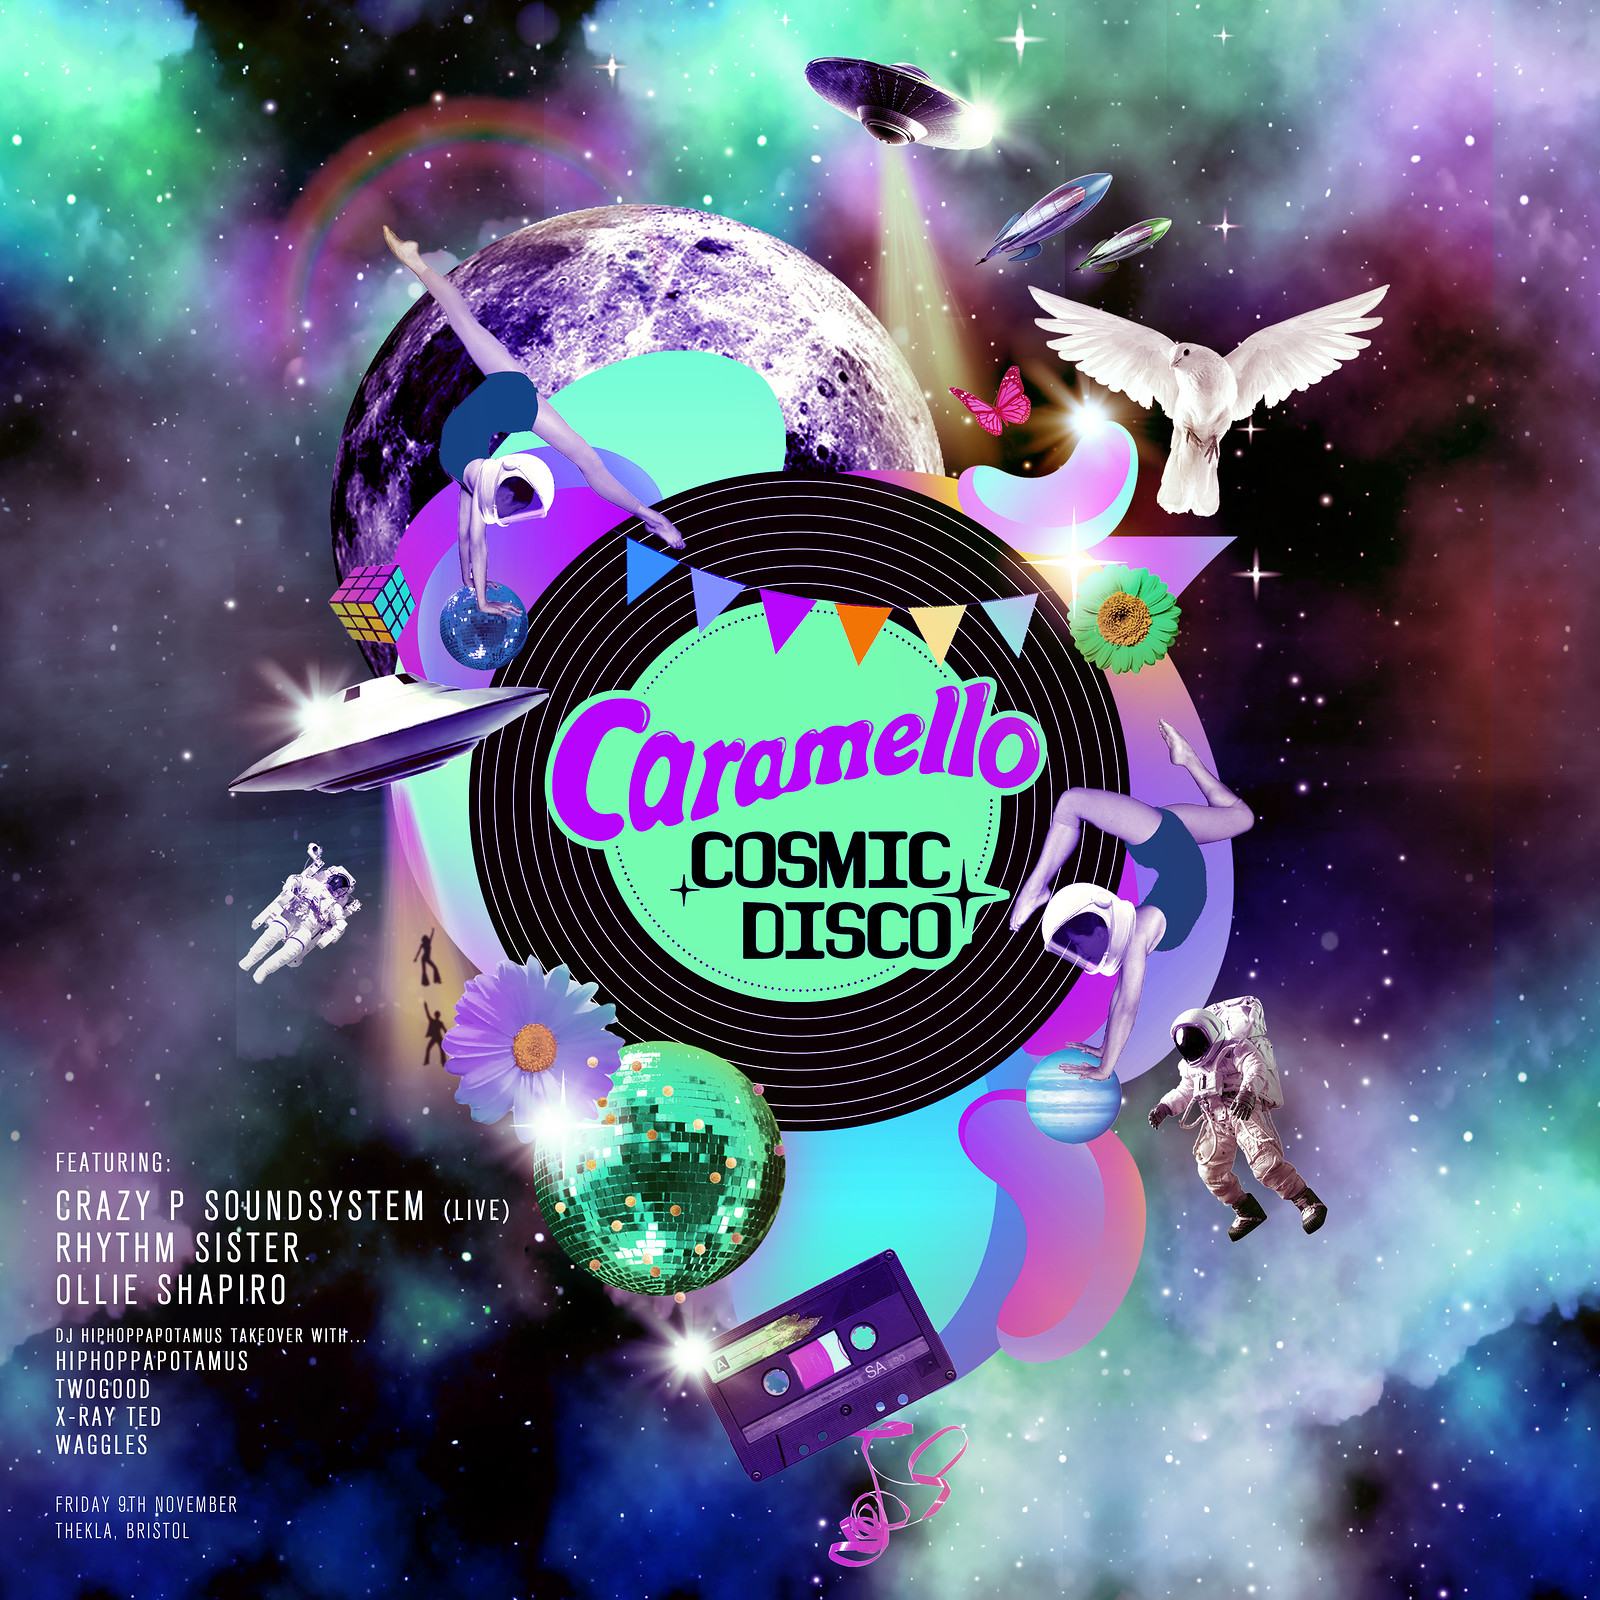 Caramello - The Cosmic Disco Launch Party at Thekla